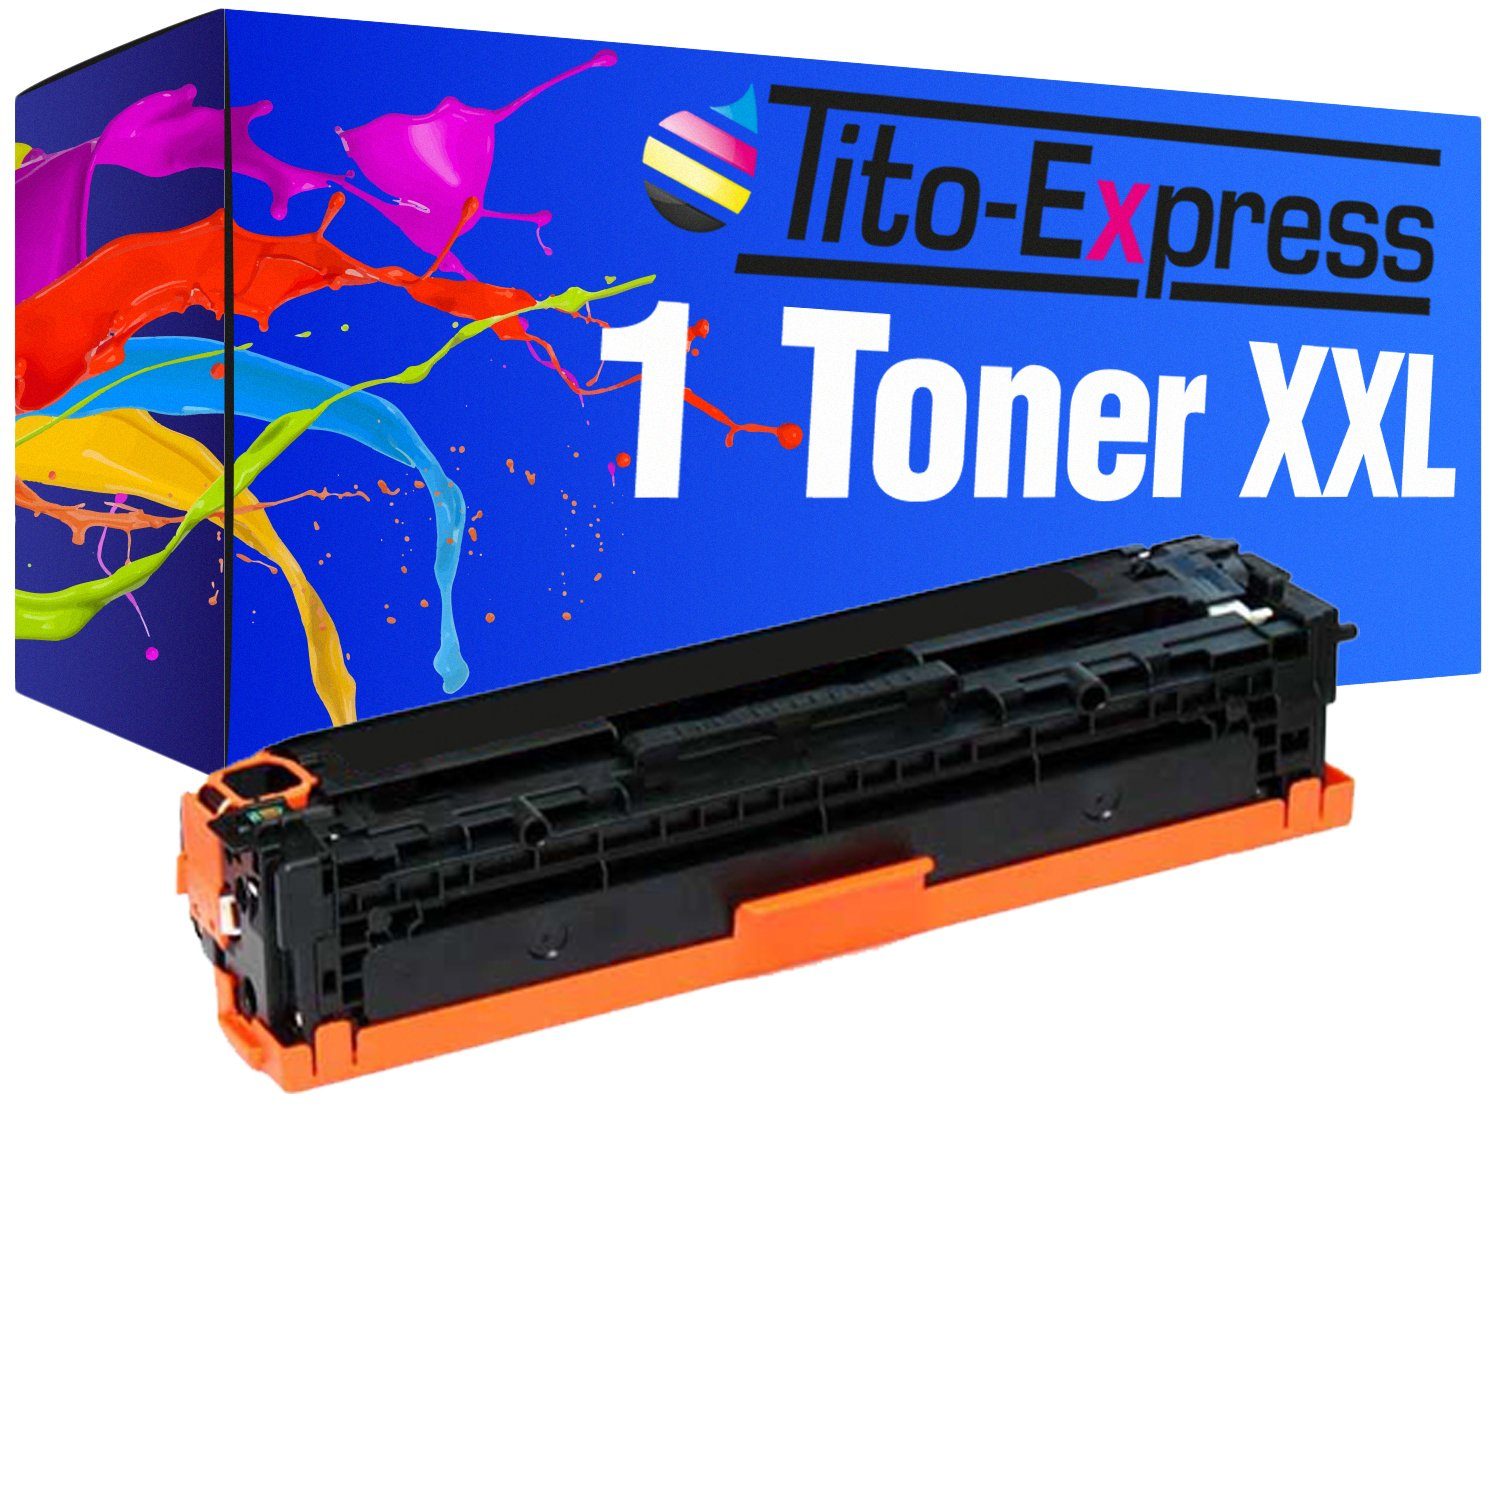 CF M-276nw M-251n (1x ersetzt CF für M-276n HP Black), Pro 131X, HPCF210X 210X 200 HP HP color LaserJet Tito-Express Tonerpatrone Series 210 M-251nw X